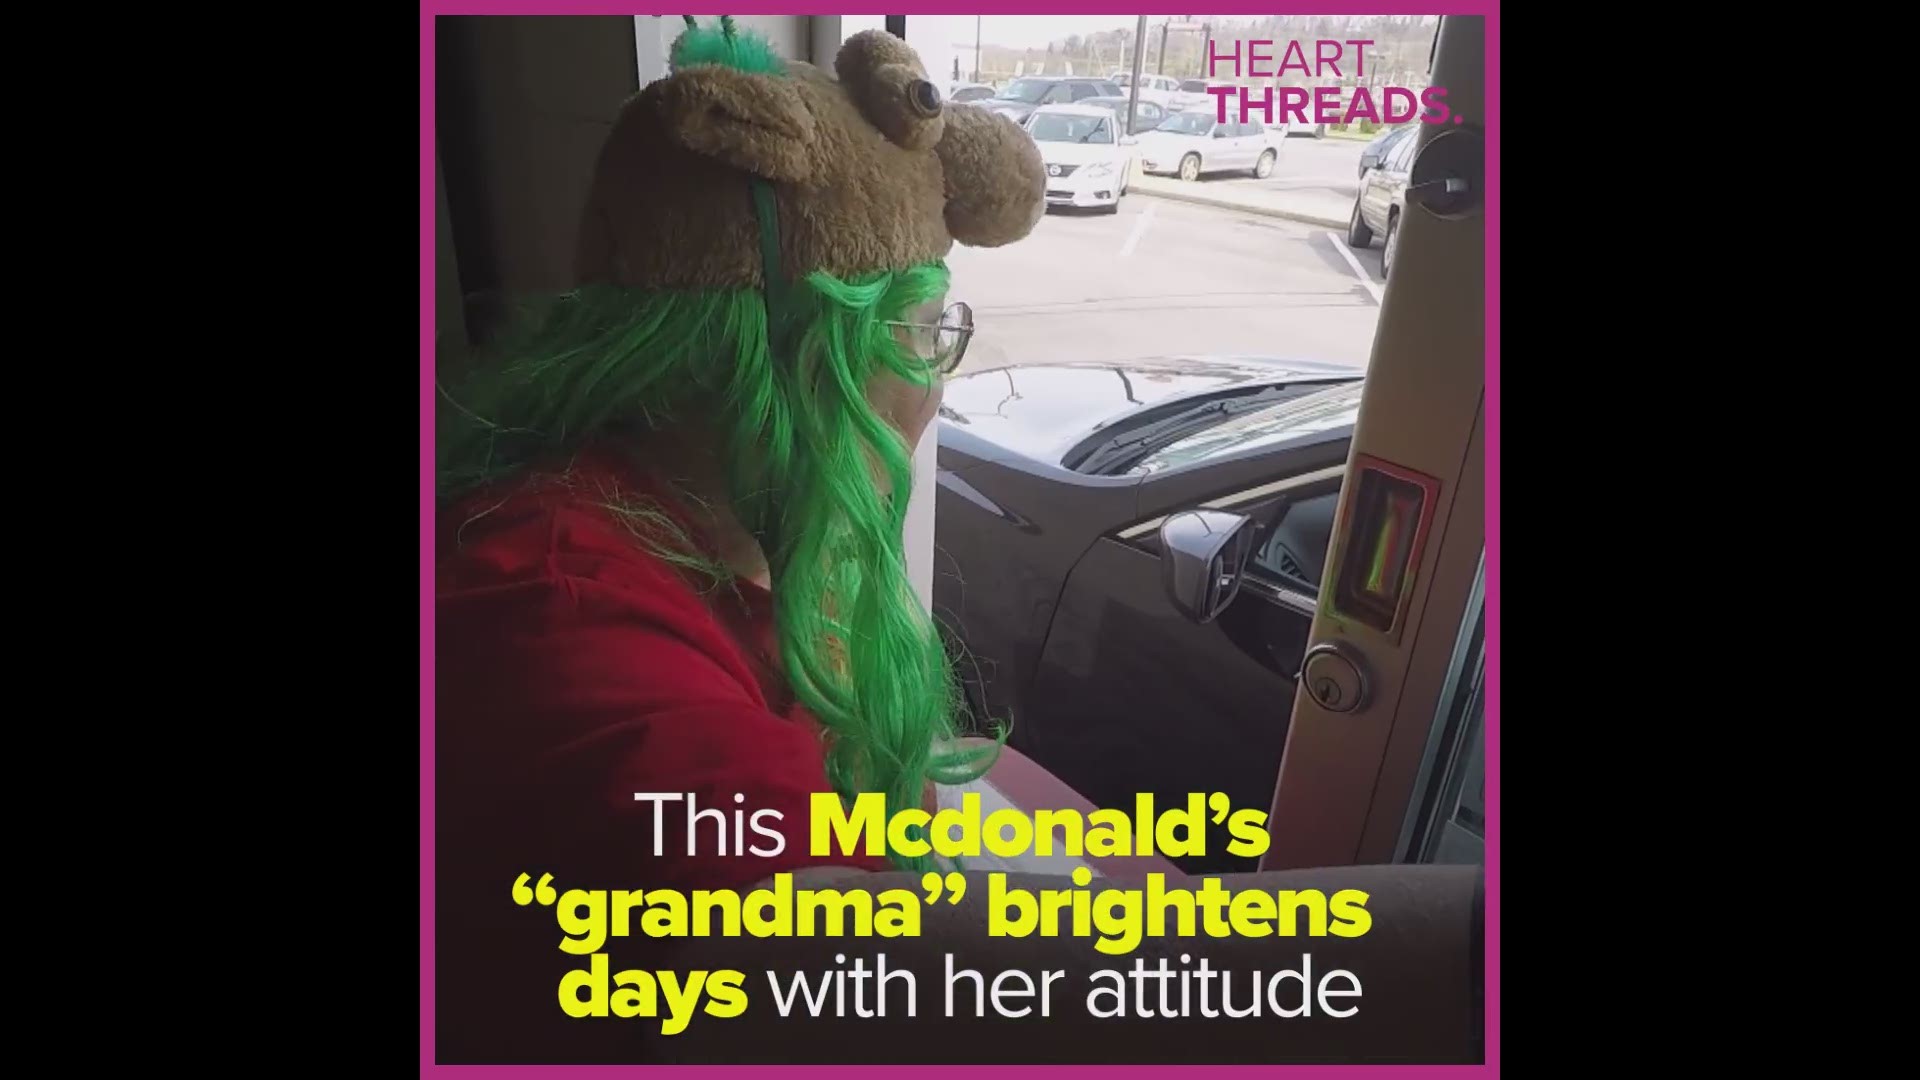 This McDonald's "Grandma" keeps customers smiling with her personality and goofy collection of hats. And she passes on some valuable life lessons to her young coworkers.